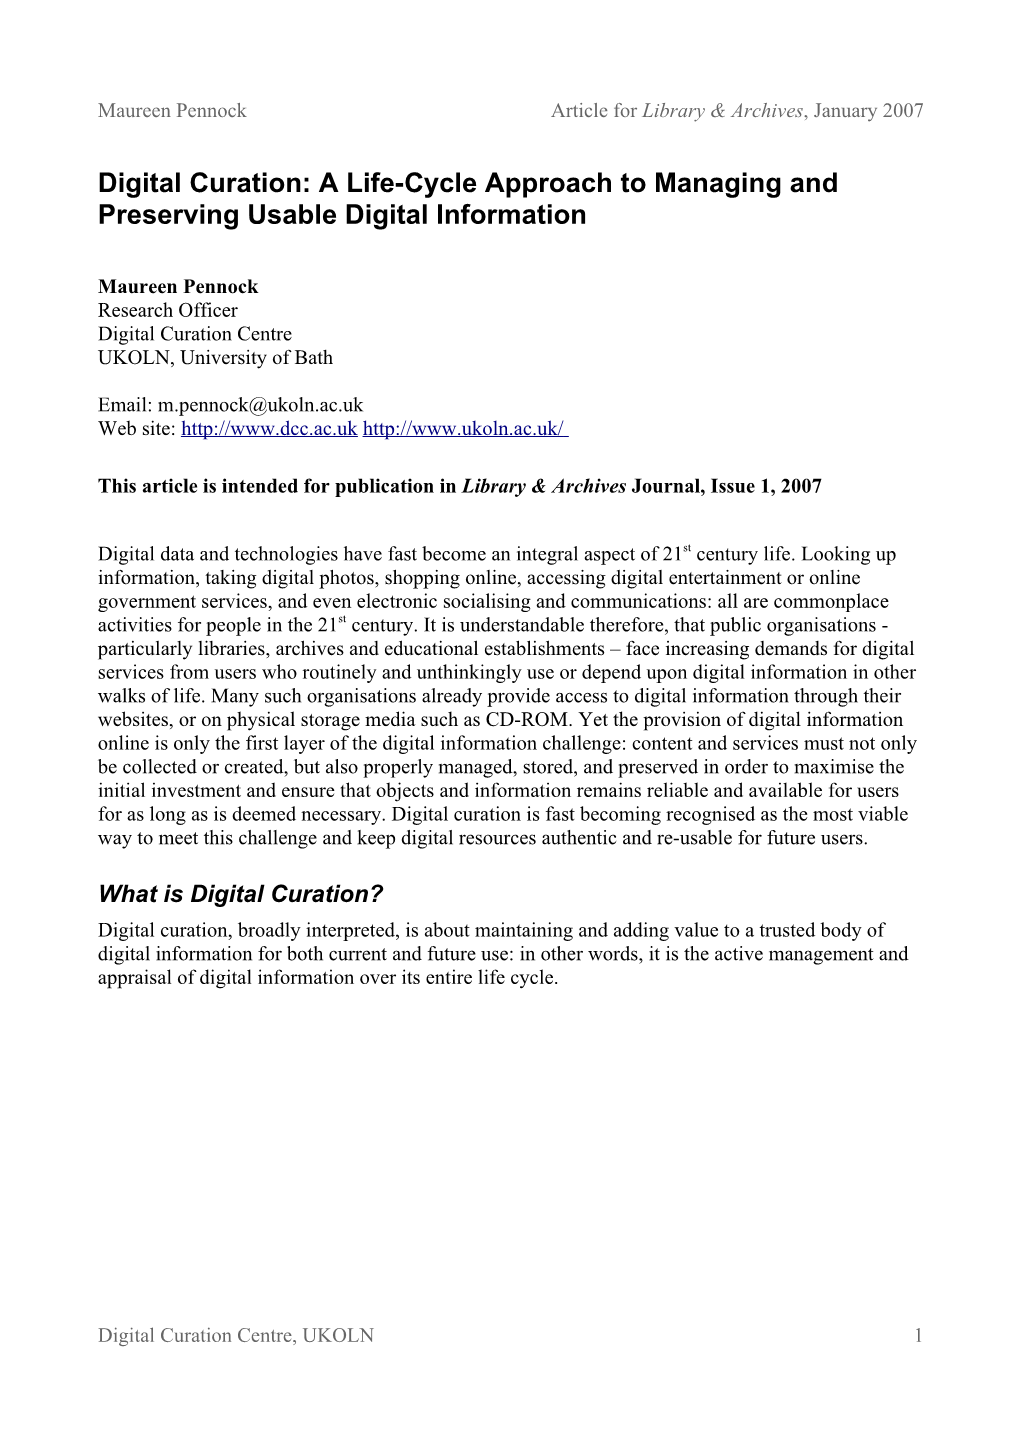 Digital Curation: a Life-Cycle Approach to Managing and Preserving Usable Digital Information